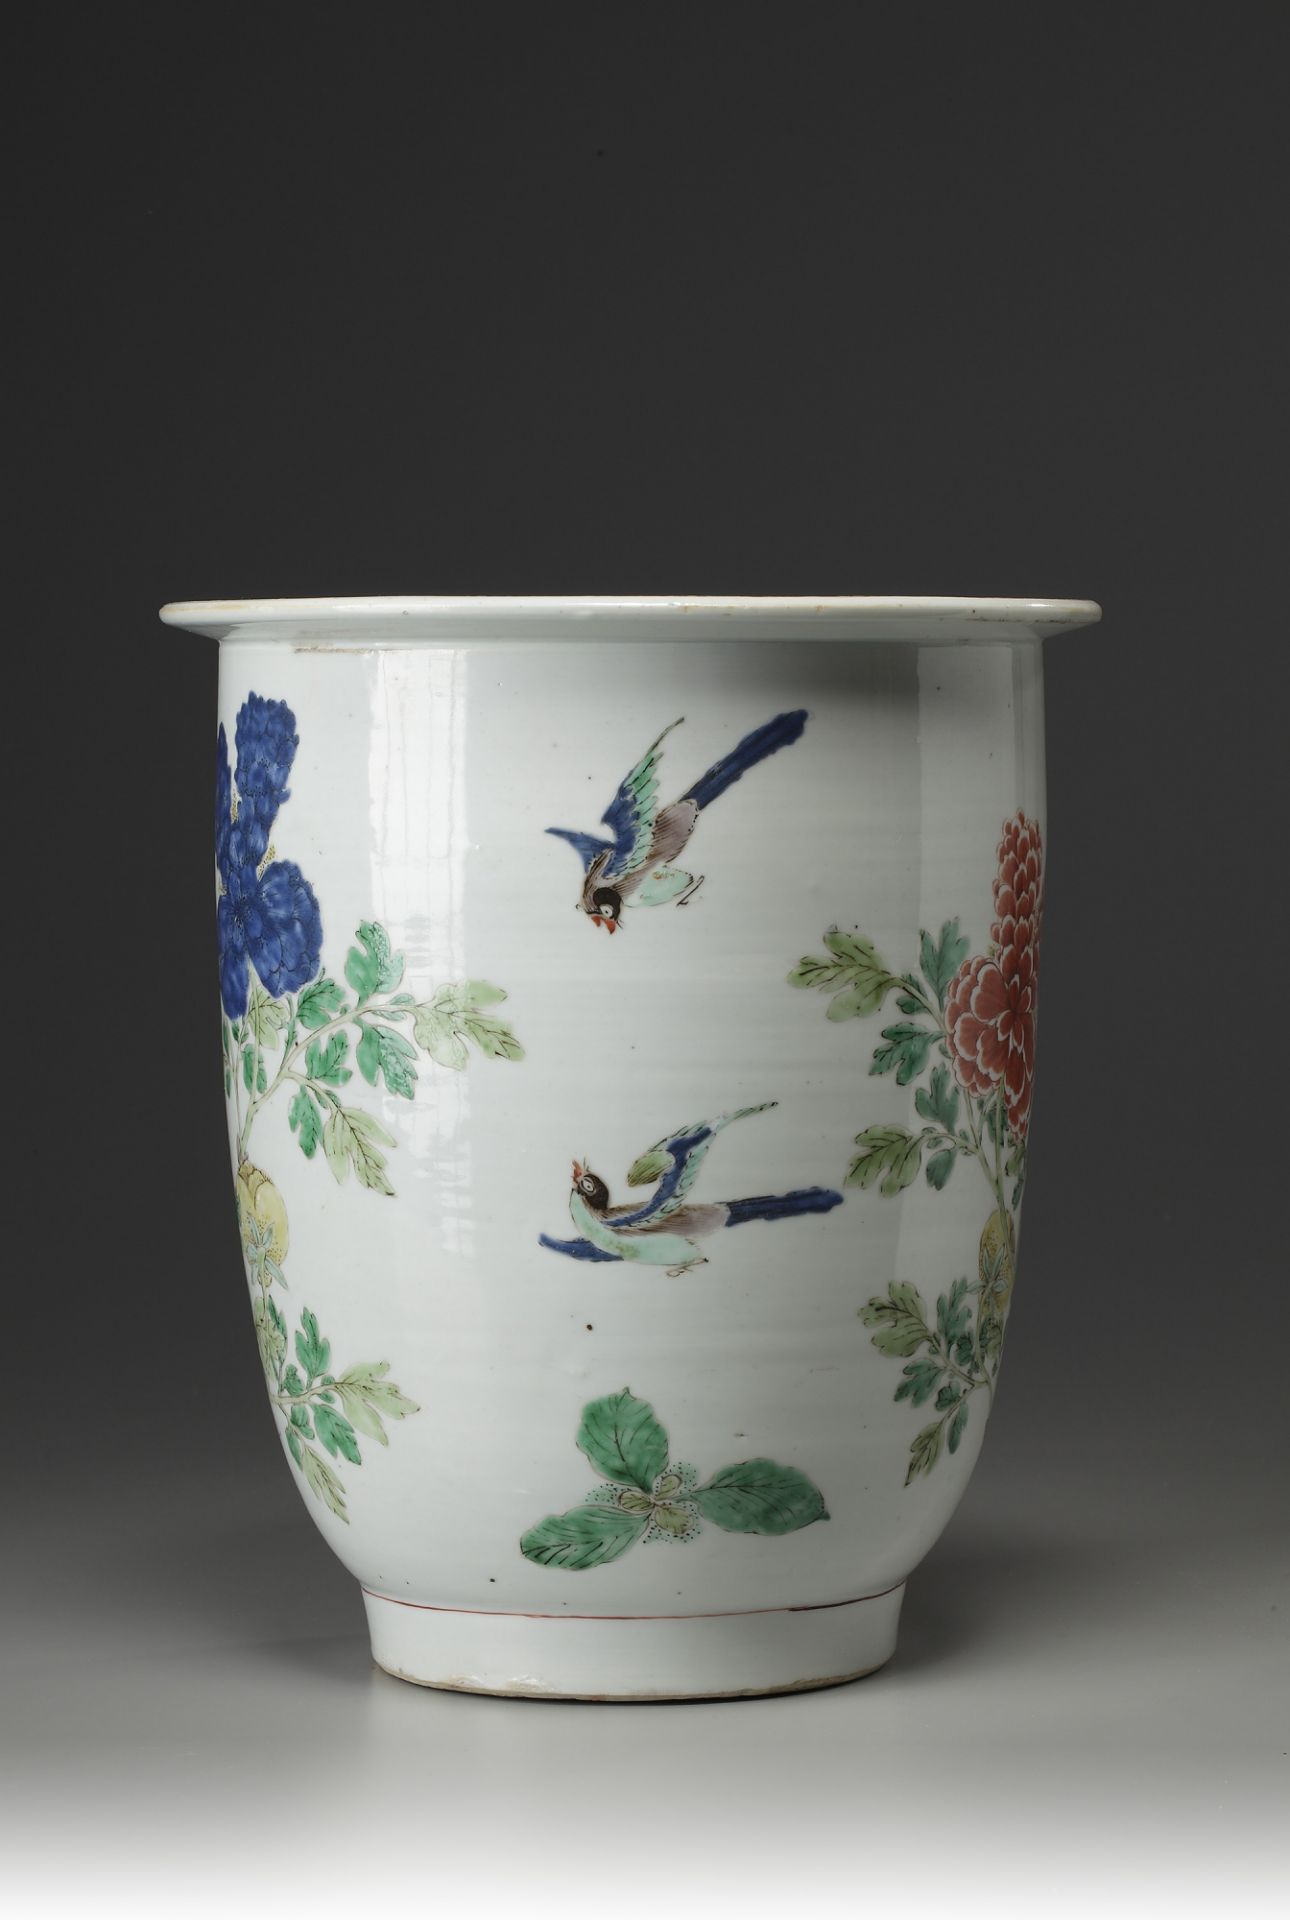 A CHINESE FAMILLE VERTE JARDINIERE, KANGXI PERIOD (1662-1722) - Image 4 of 6